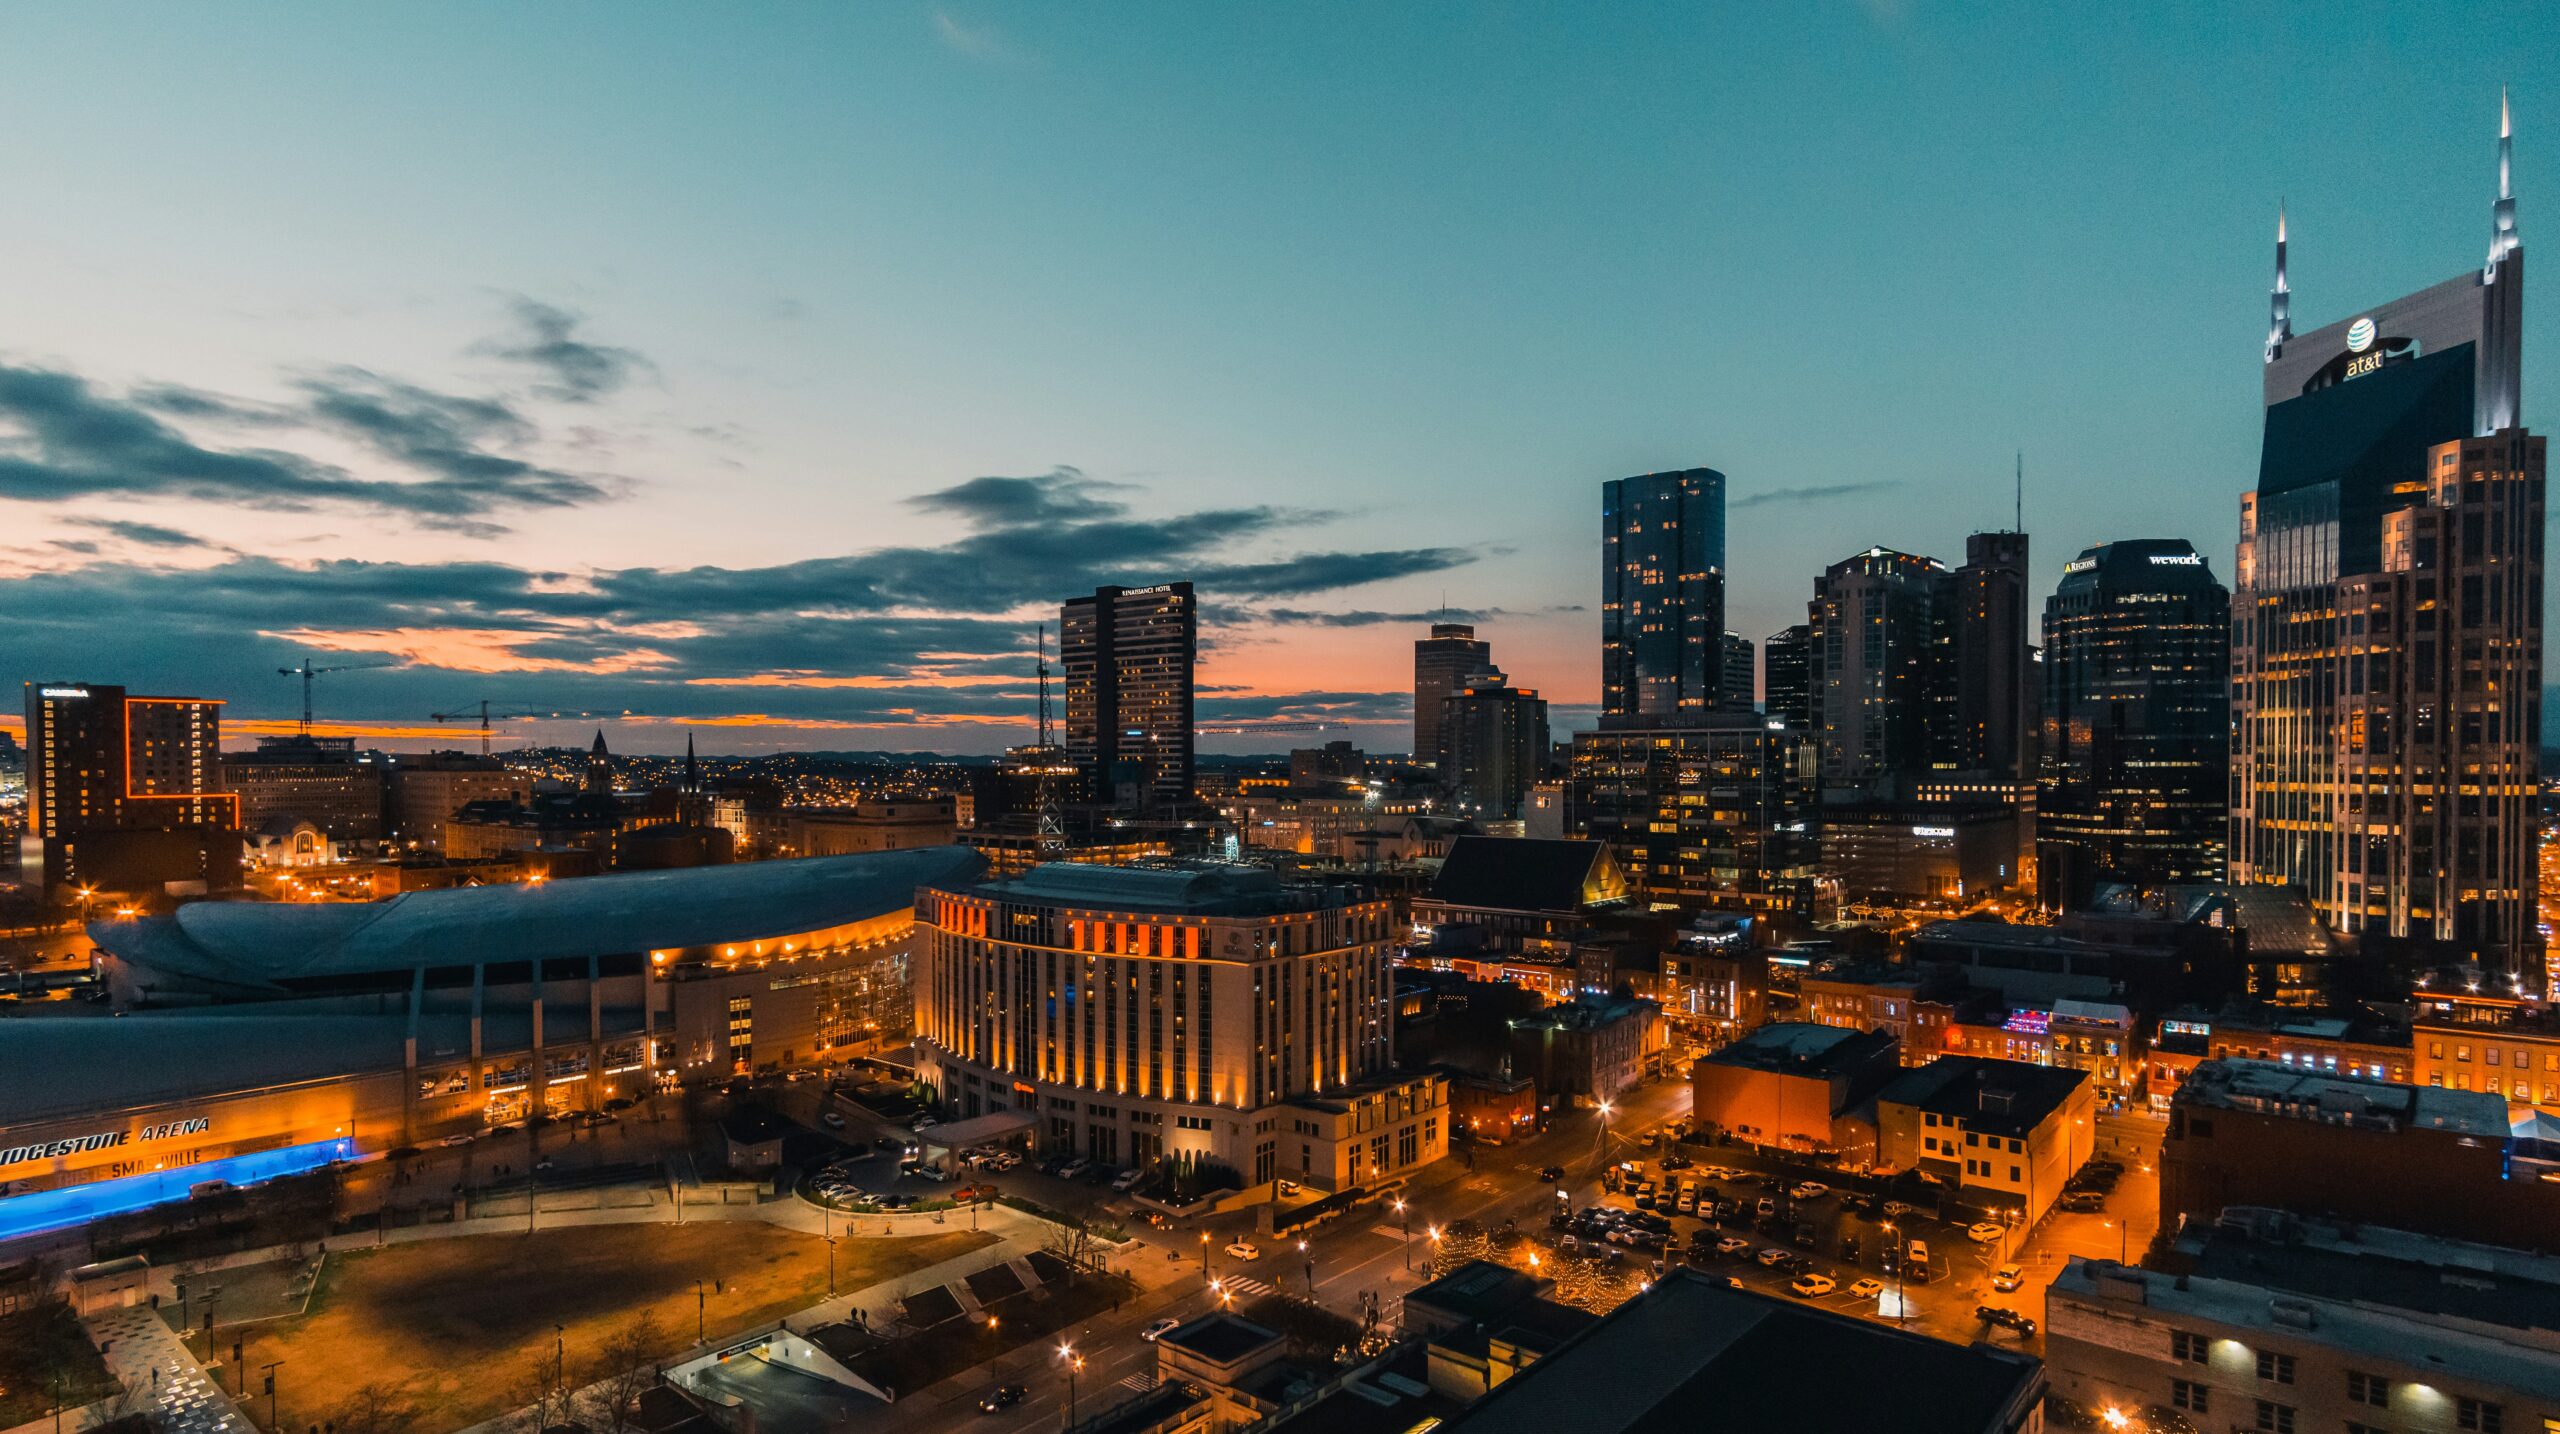 Nashville is one of the best places to live in Tennessee for country music fans, large city lovers and those who like nightlife, culture and the arts. Pictured: The Nashville, TN skyline.